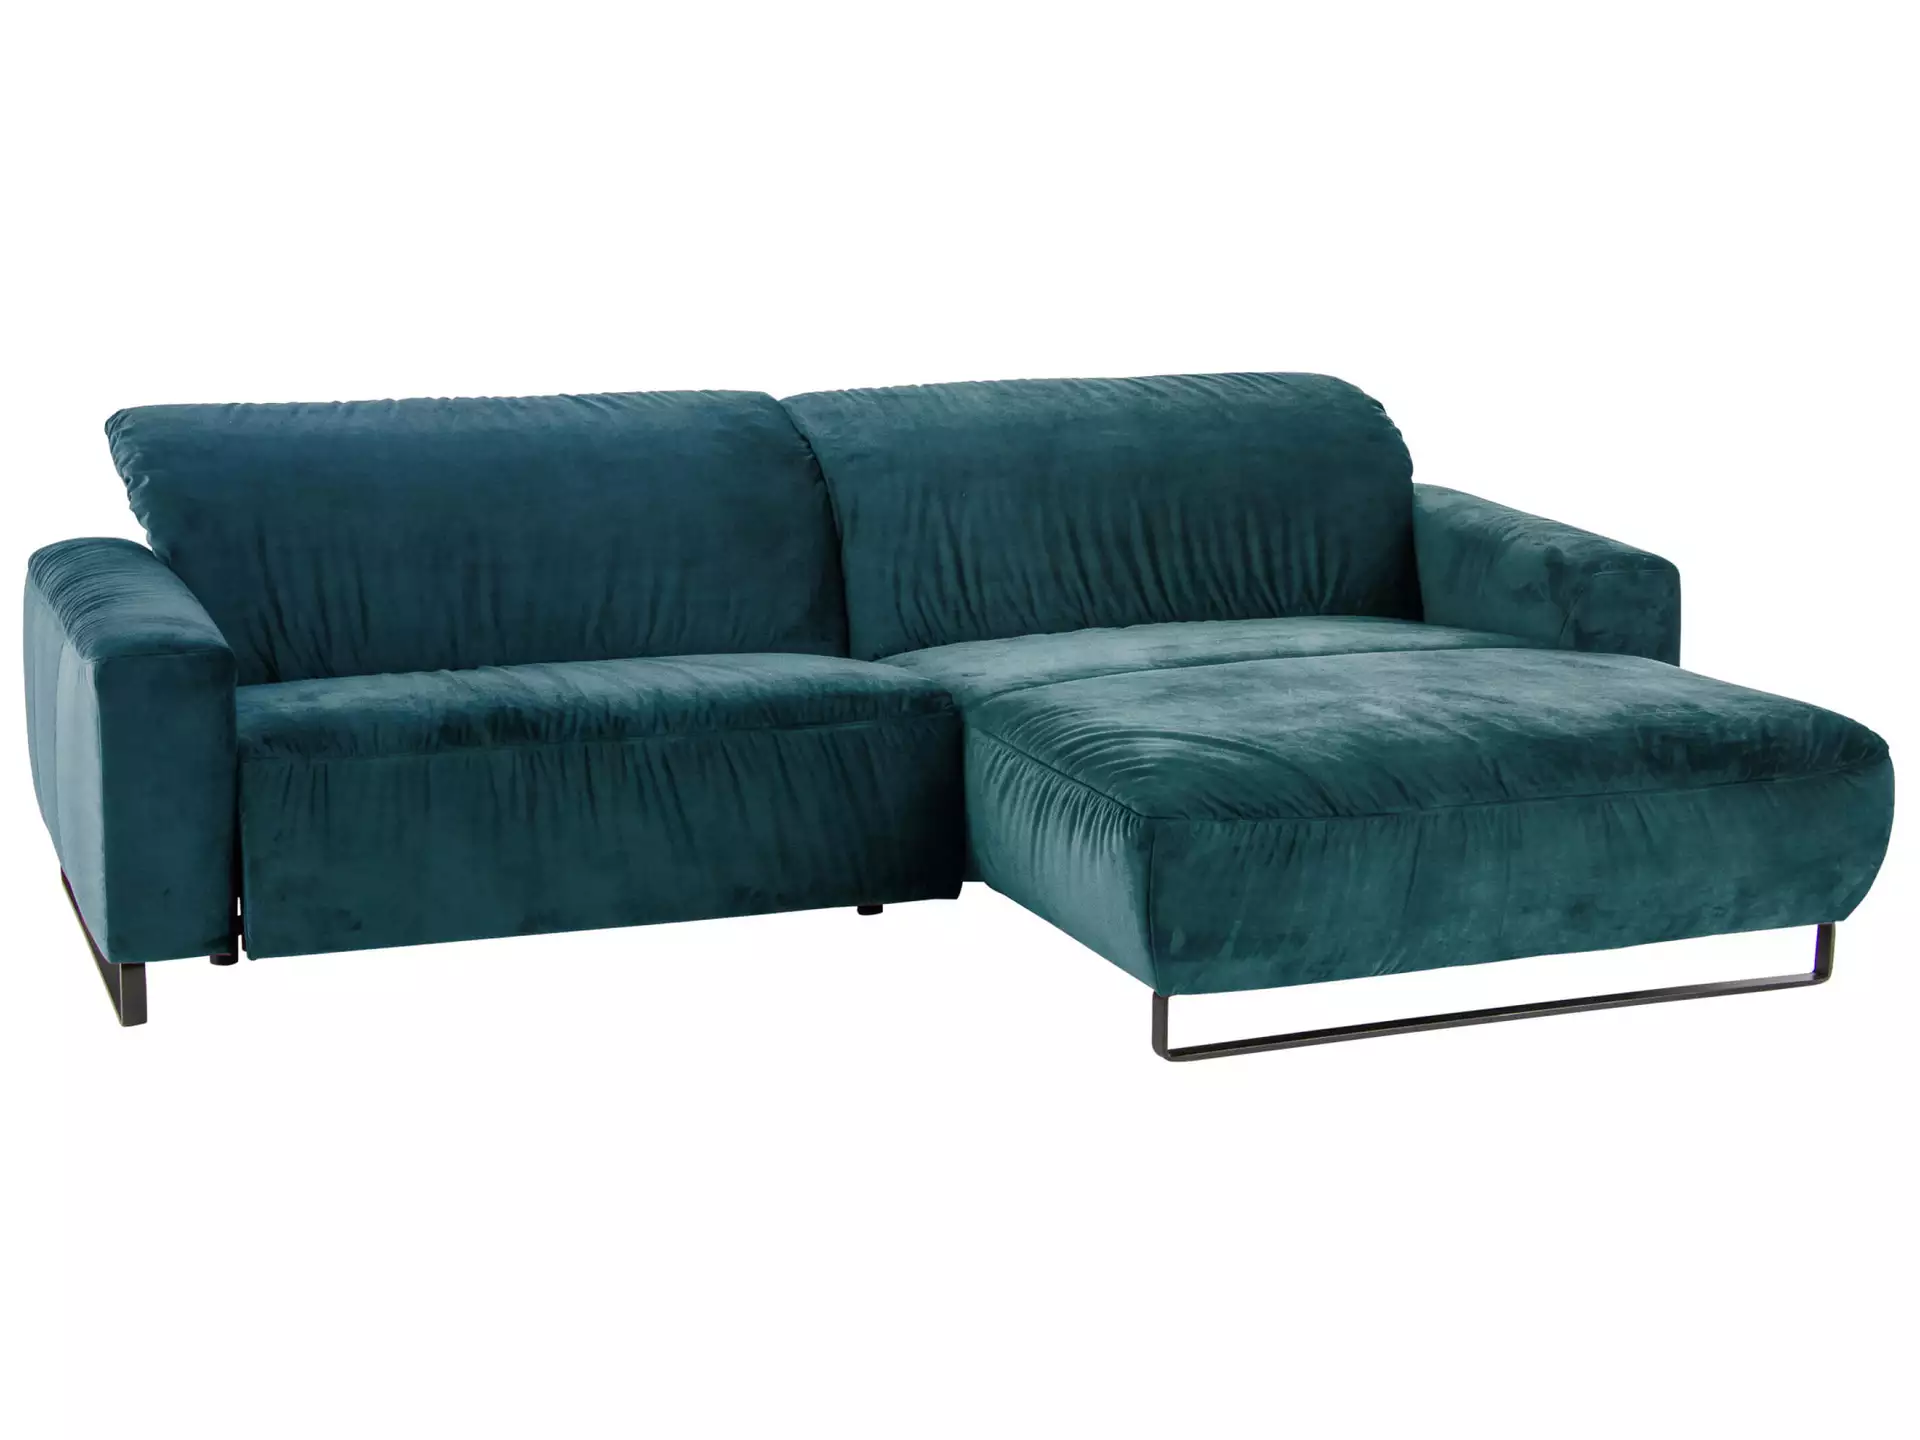 Ecksofa Eindhoven Basic Candy / Farbe: Petrol / Material: Stoff Basic